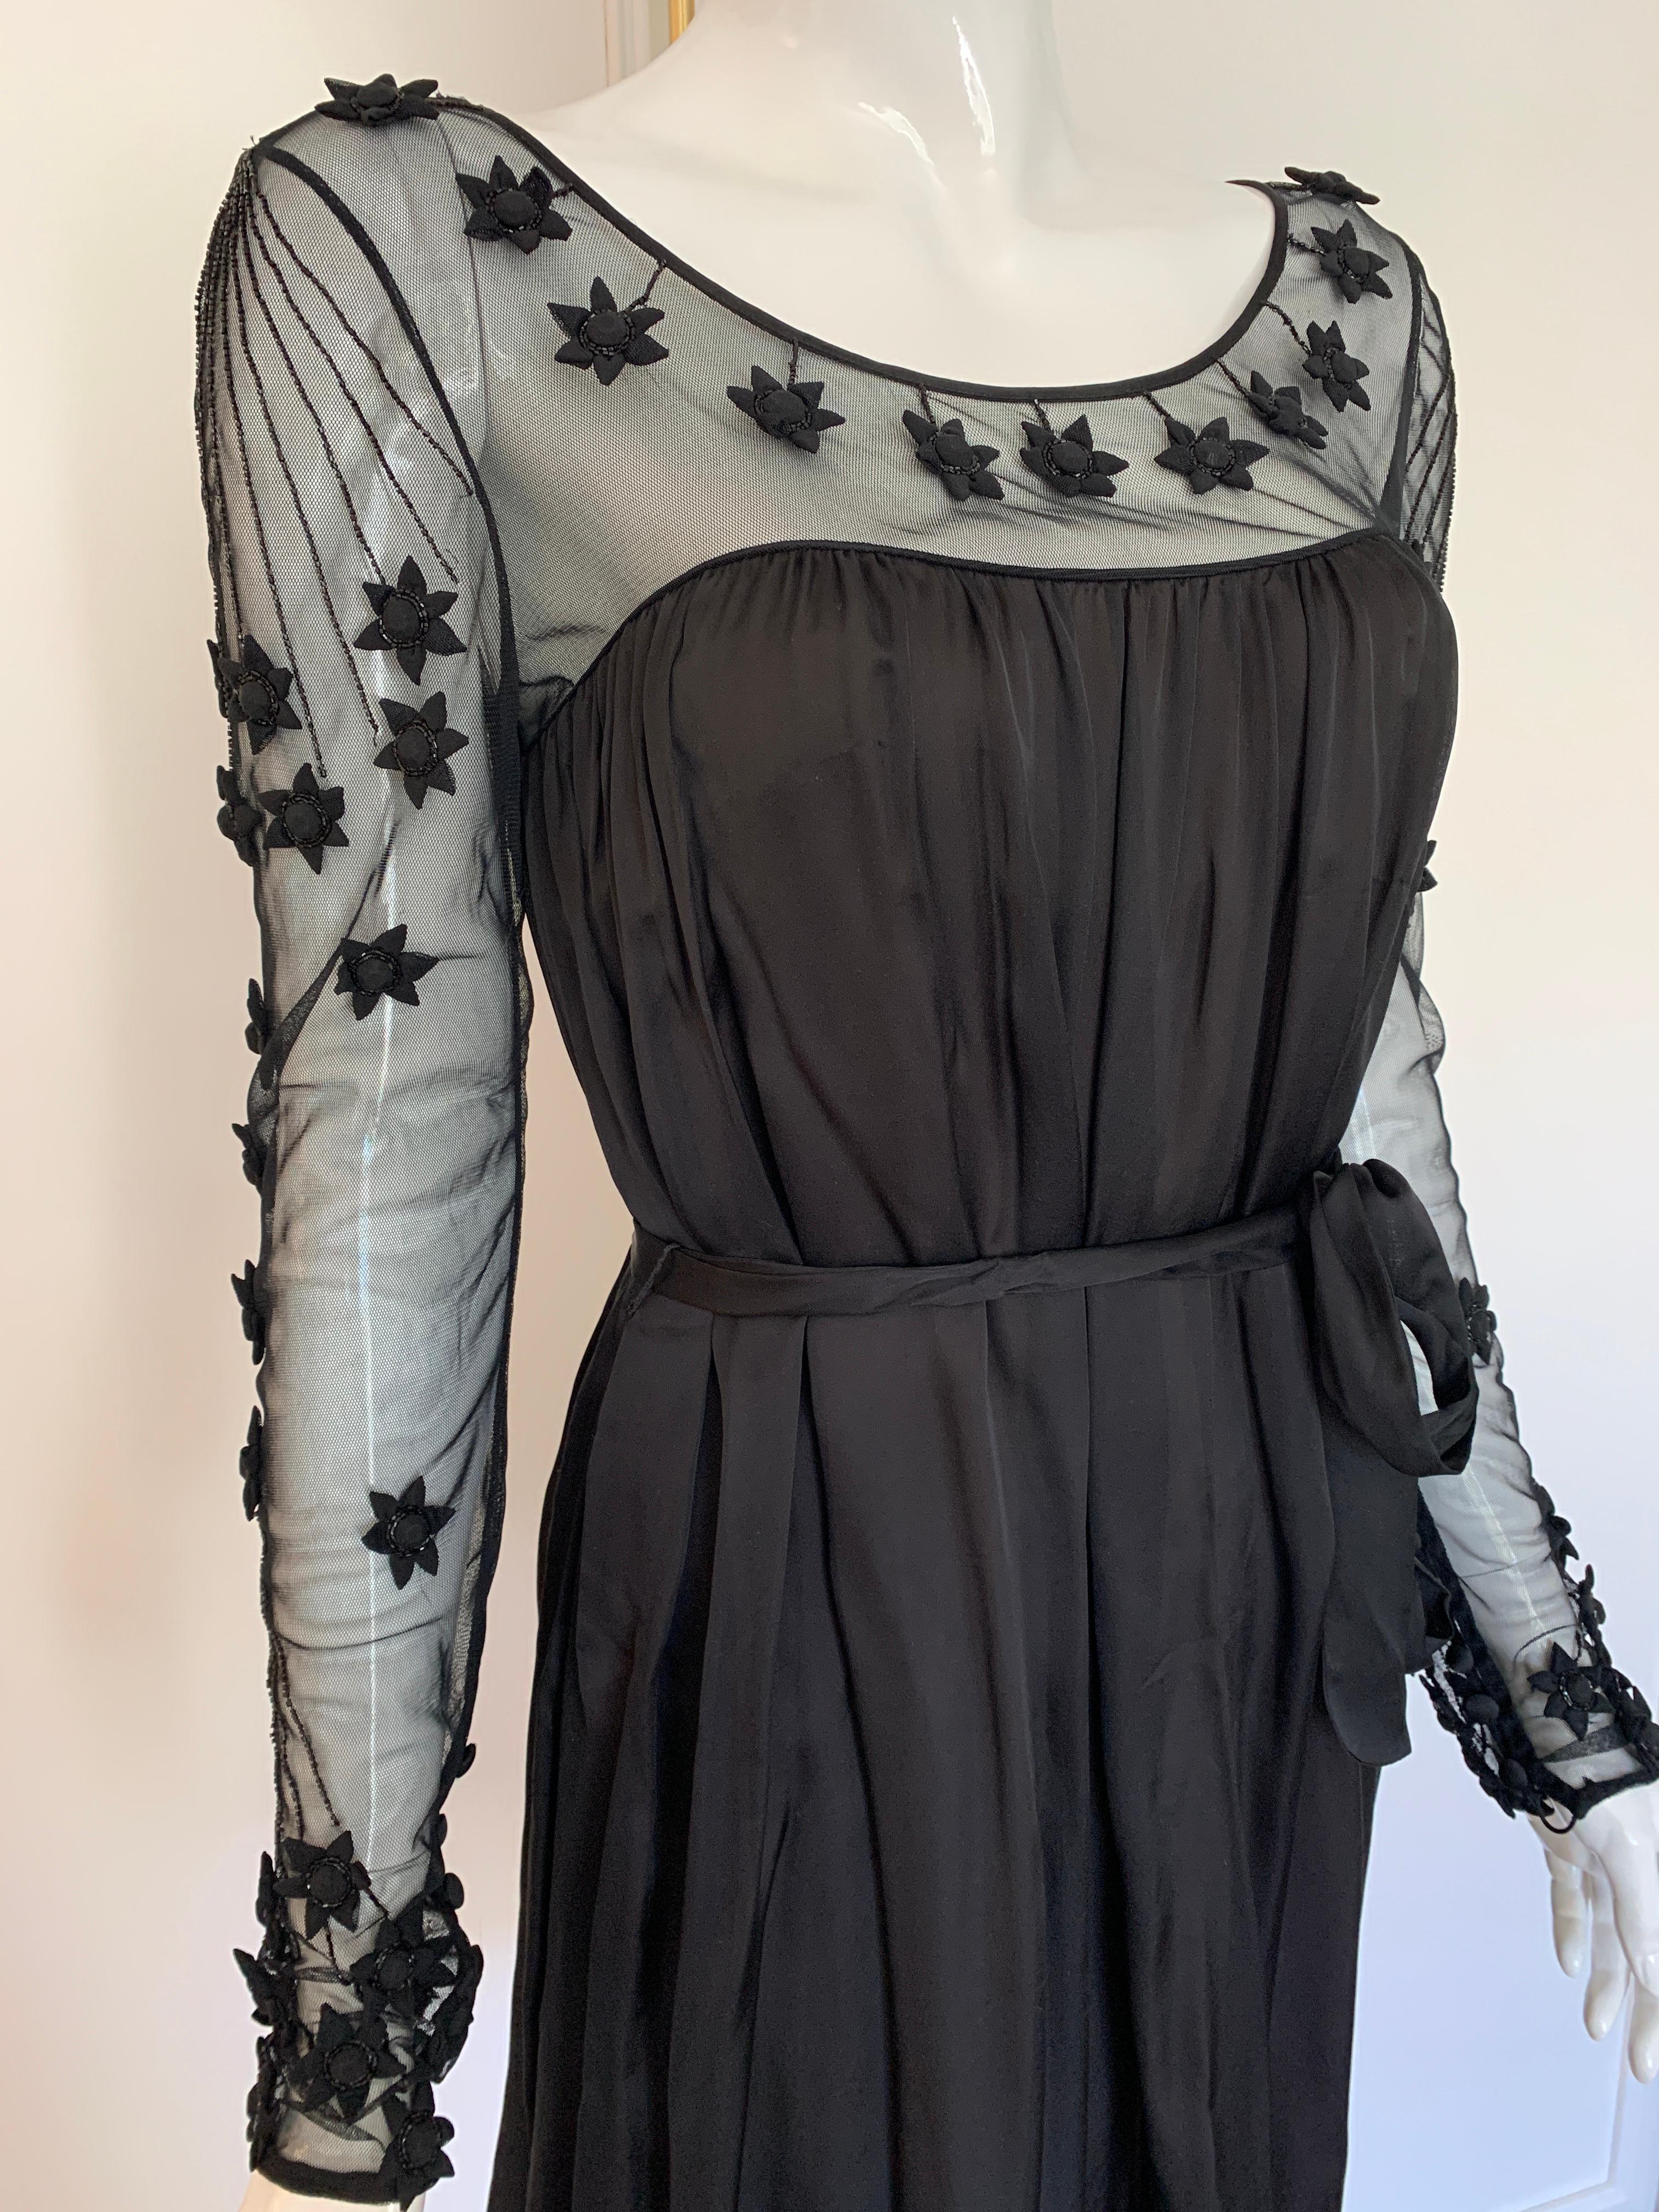 Temperley Black Flower Applique Silk Dress in size Ex small/small. 
100% Silk with a lining of nude silk. 
Sheer arms and neck detailing. 
Some imperfections with applique, please see photos. 
Mid Length with a belt. 

